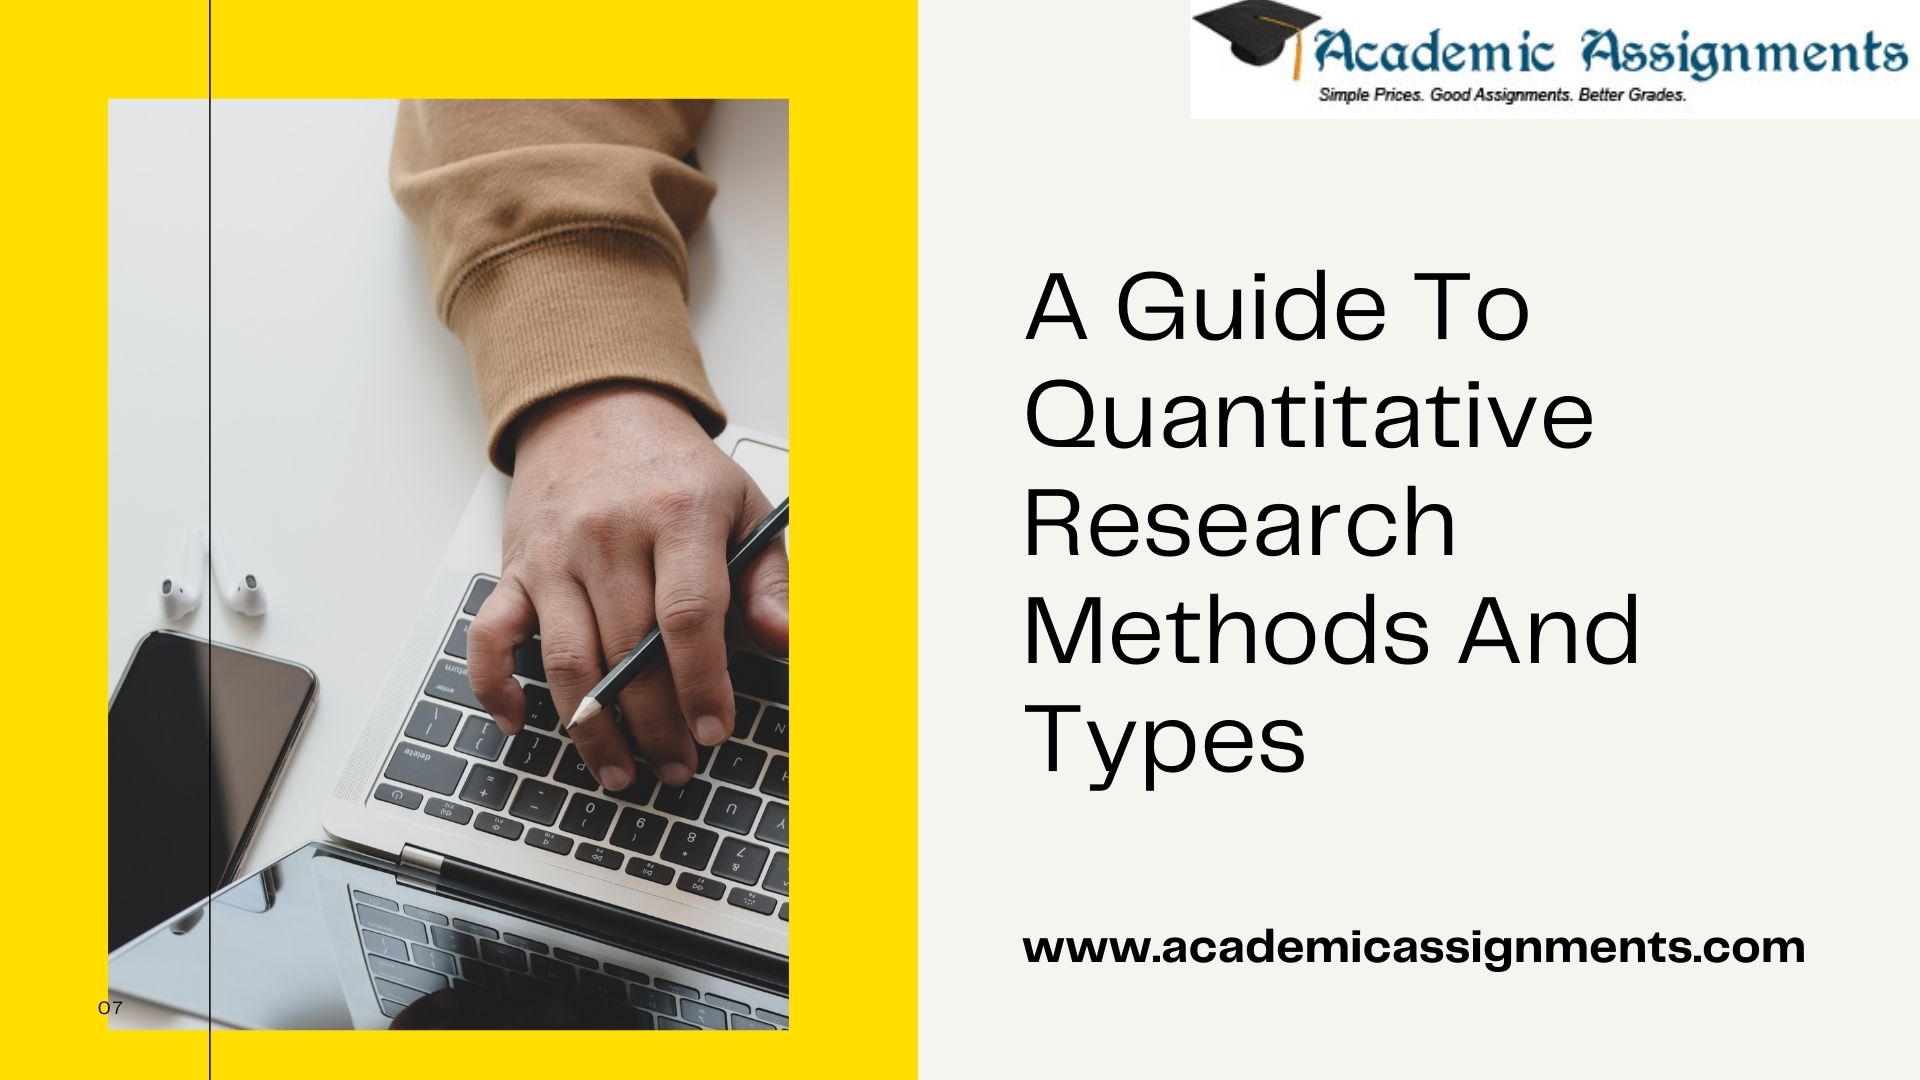 A Guide To Quantitative Research Methods And Types